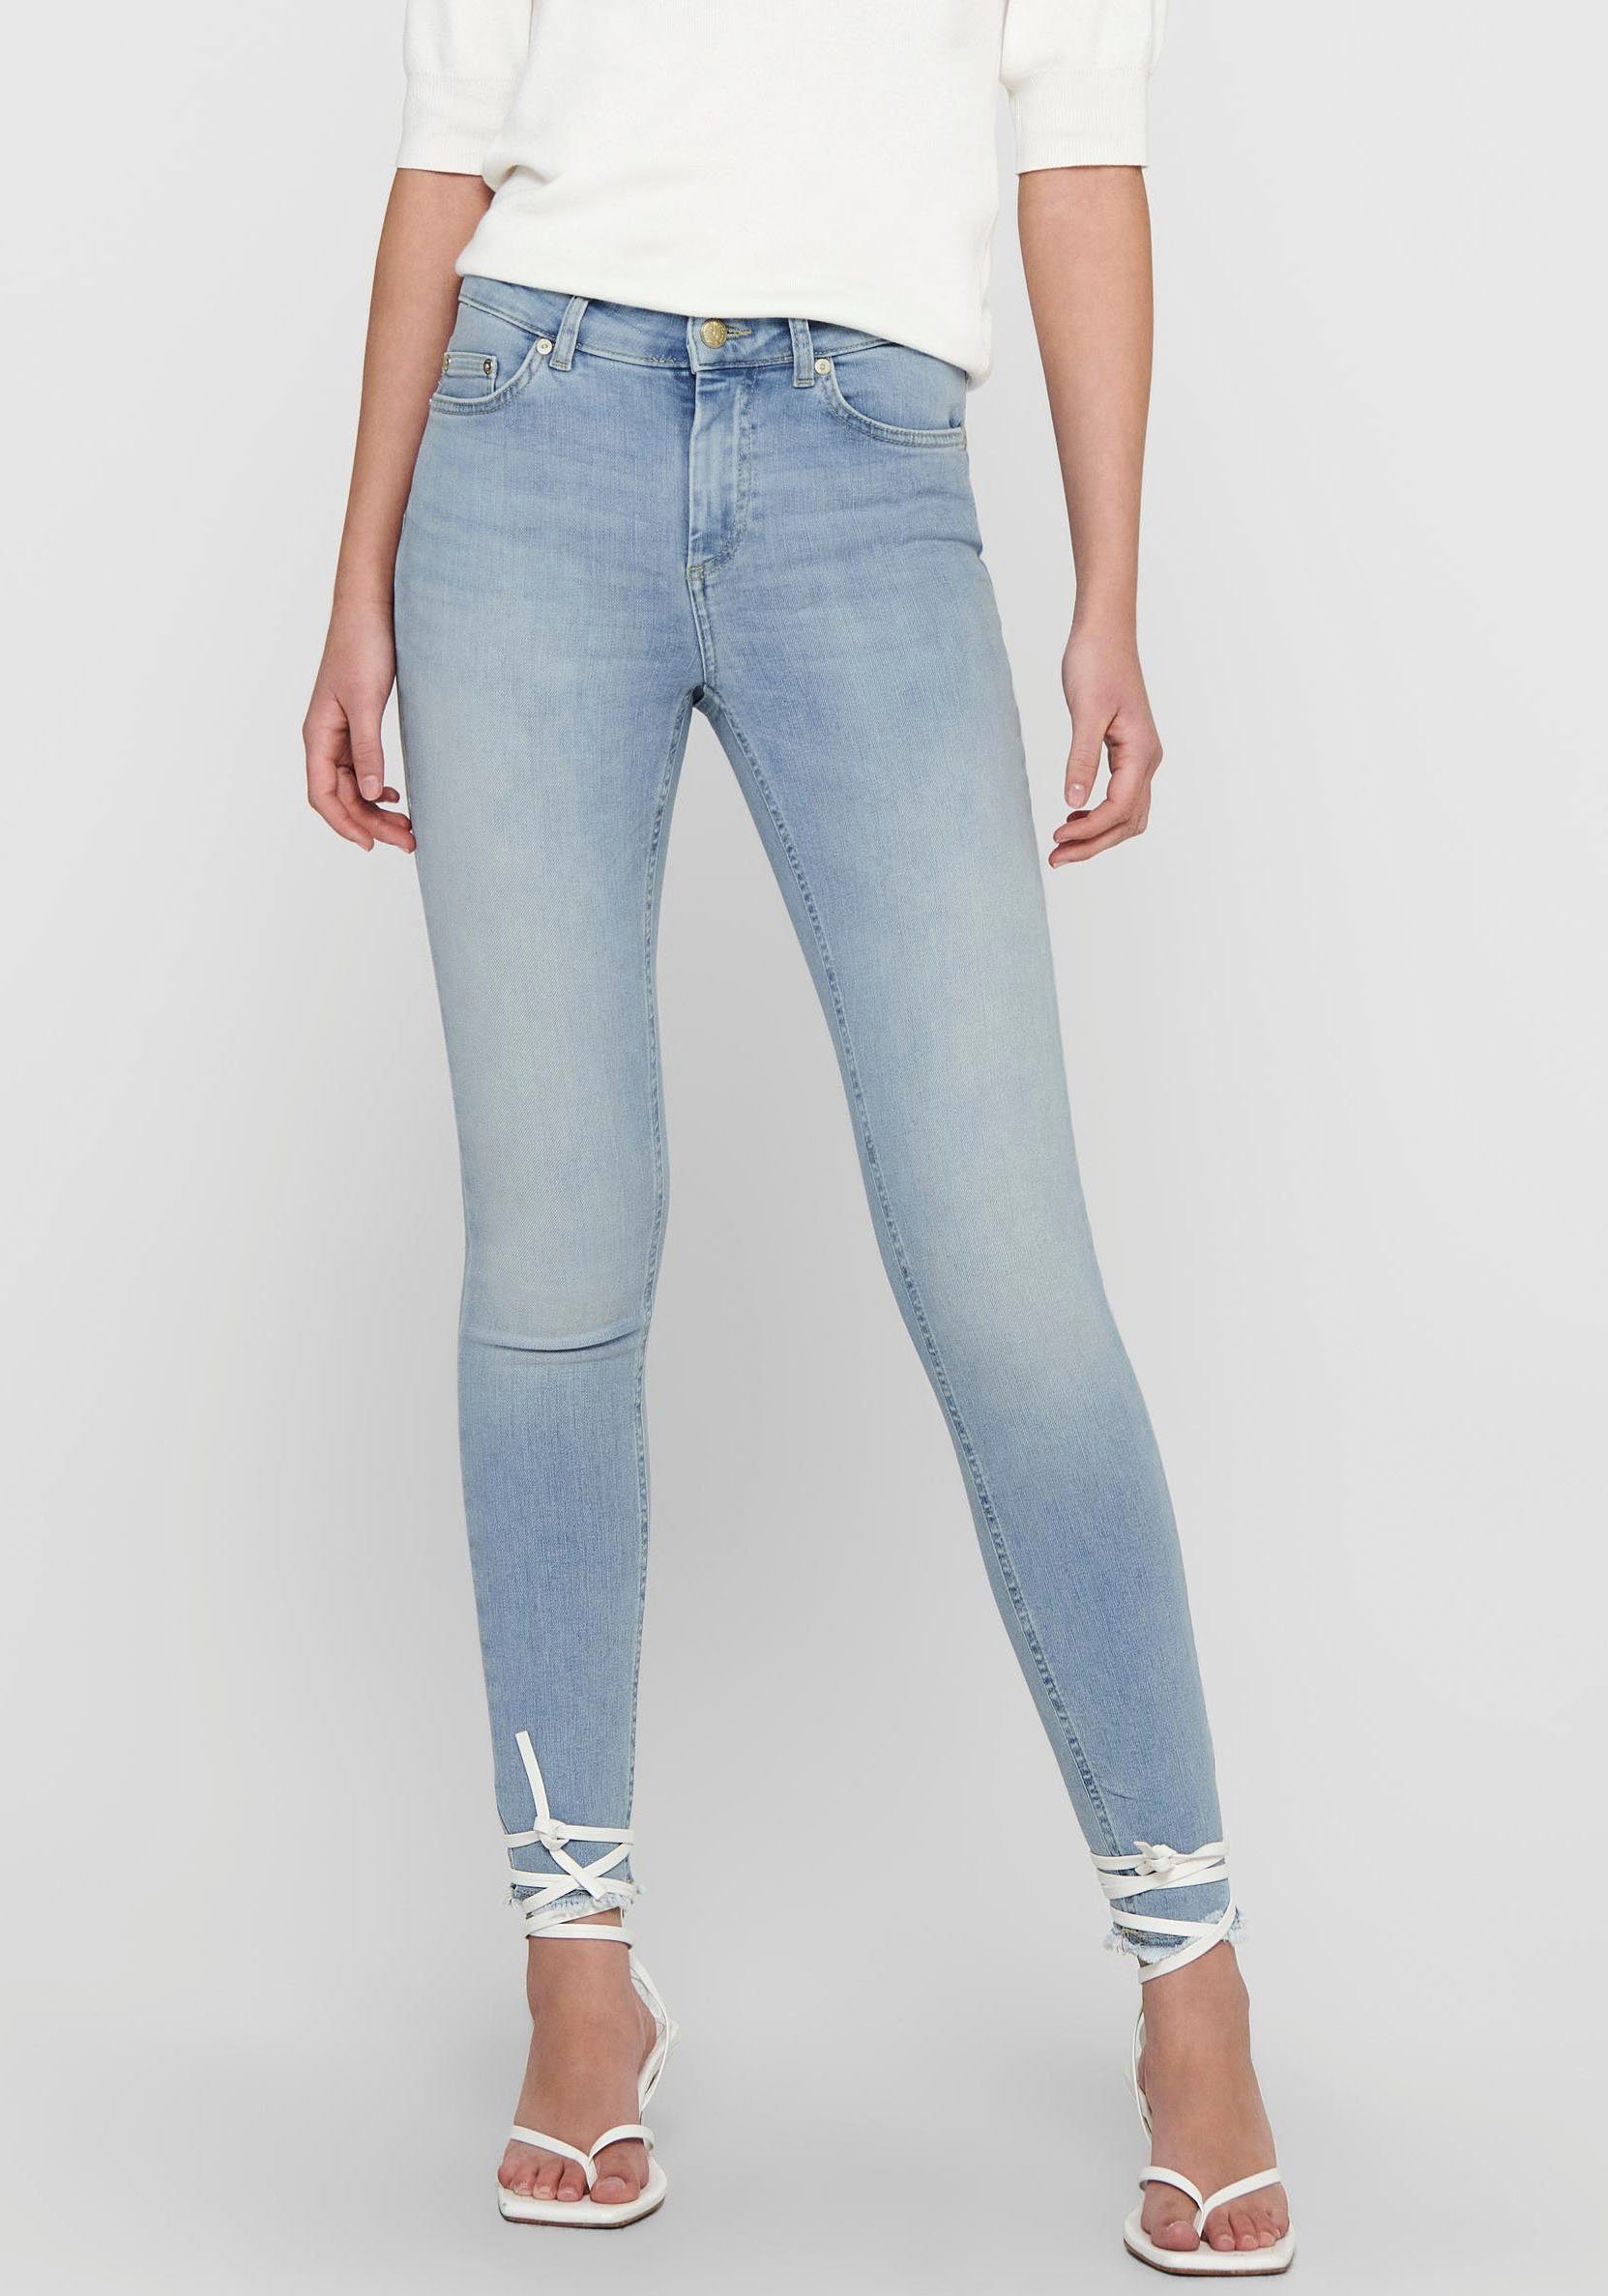 Only Blush mid ankle Skinny jeans